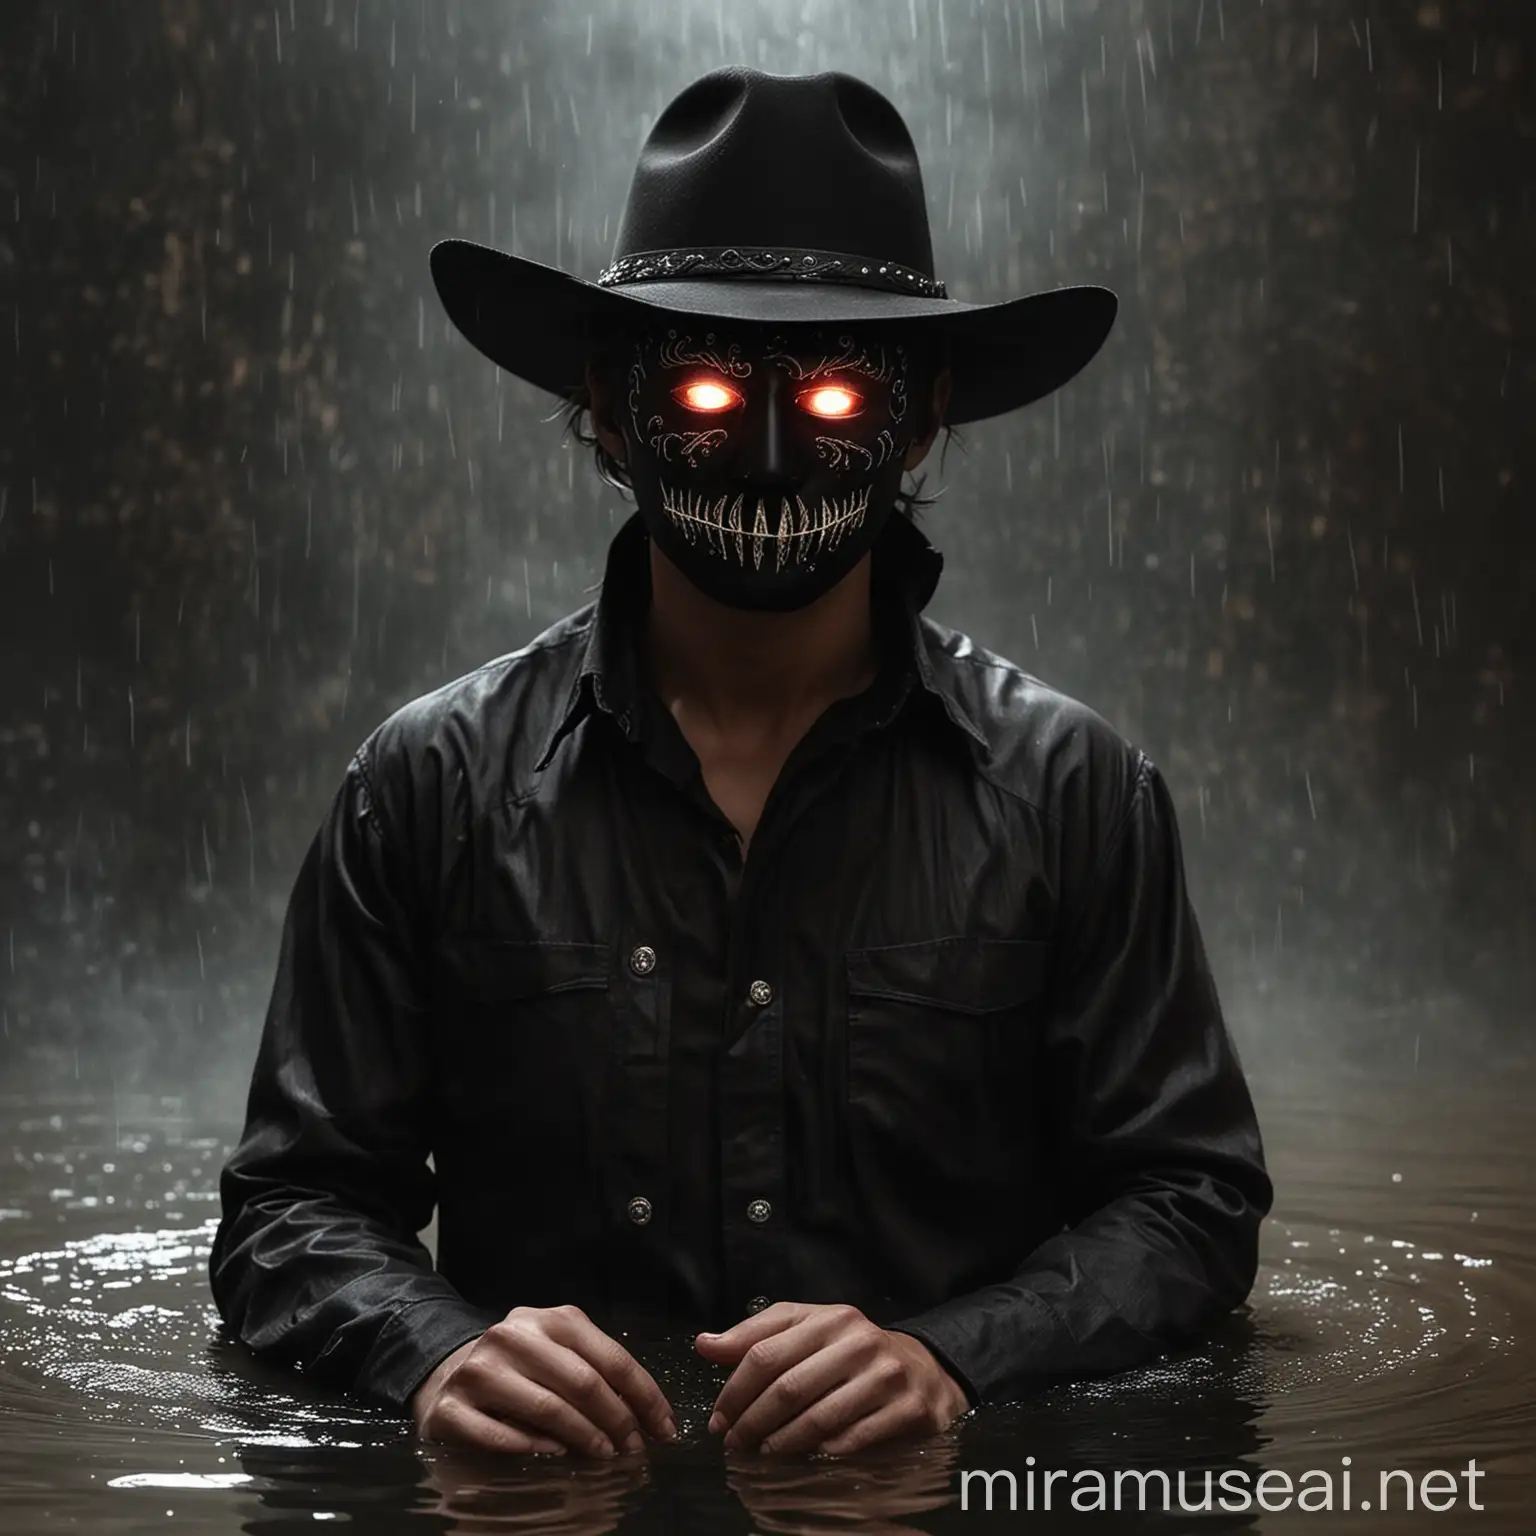 Mysterious Figure in Black Cowboy Hat and Mask with Glowing Eyes Red Water Scene